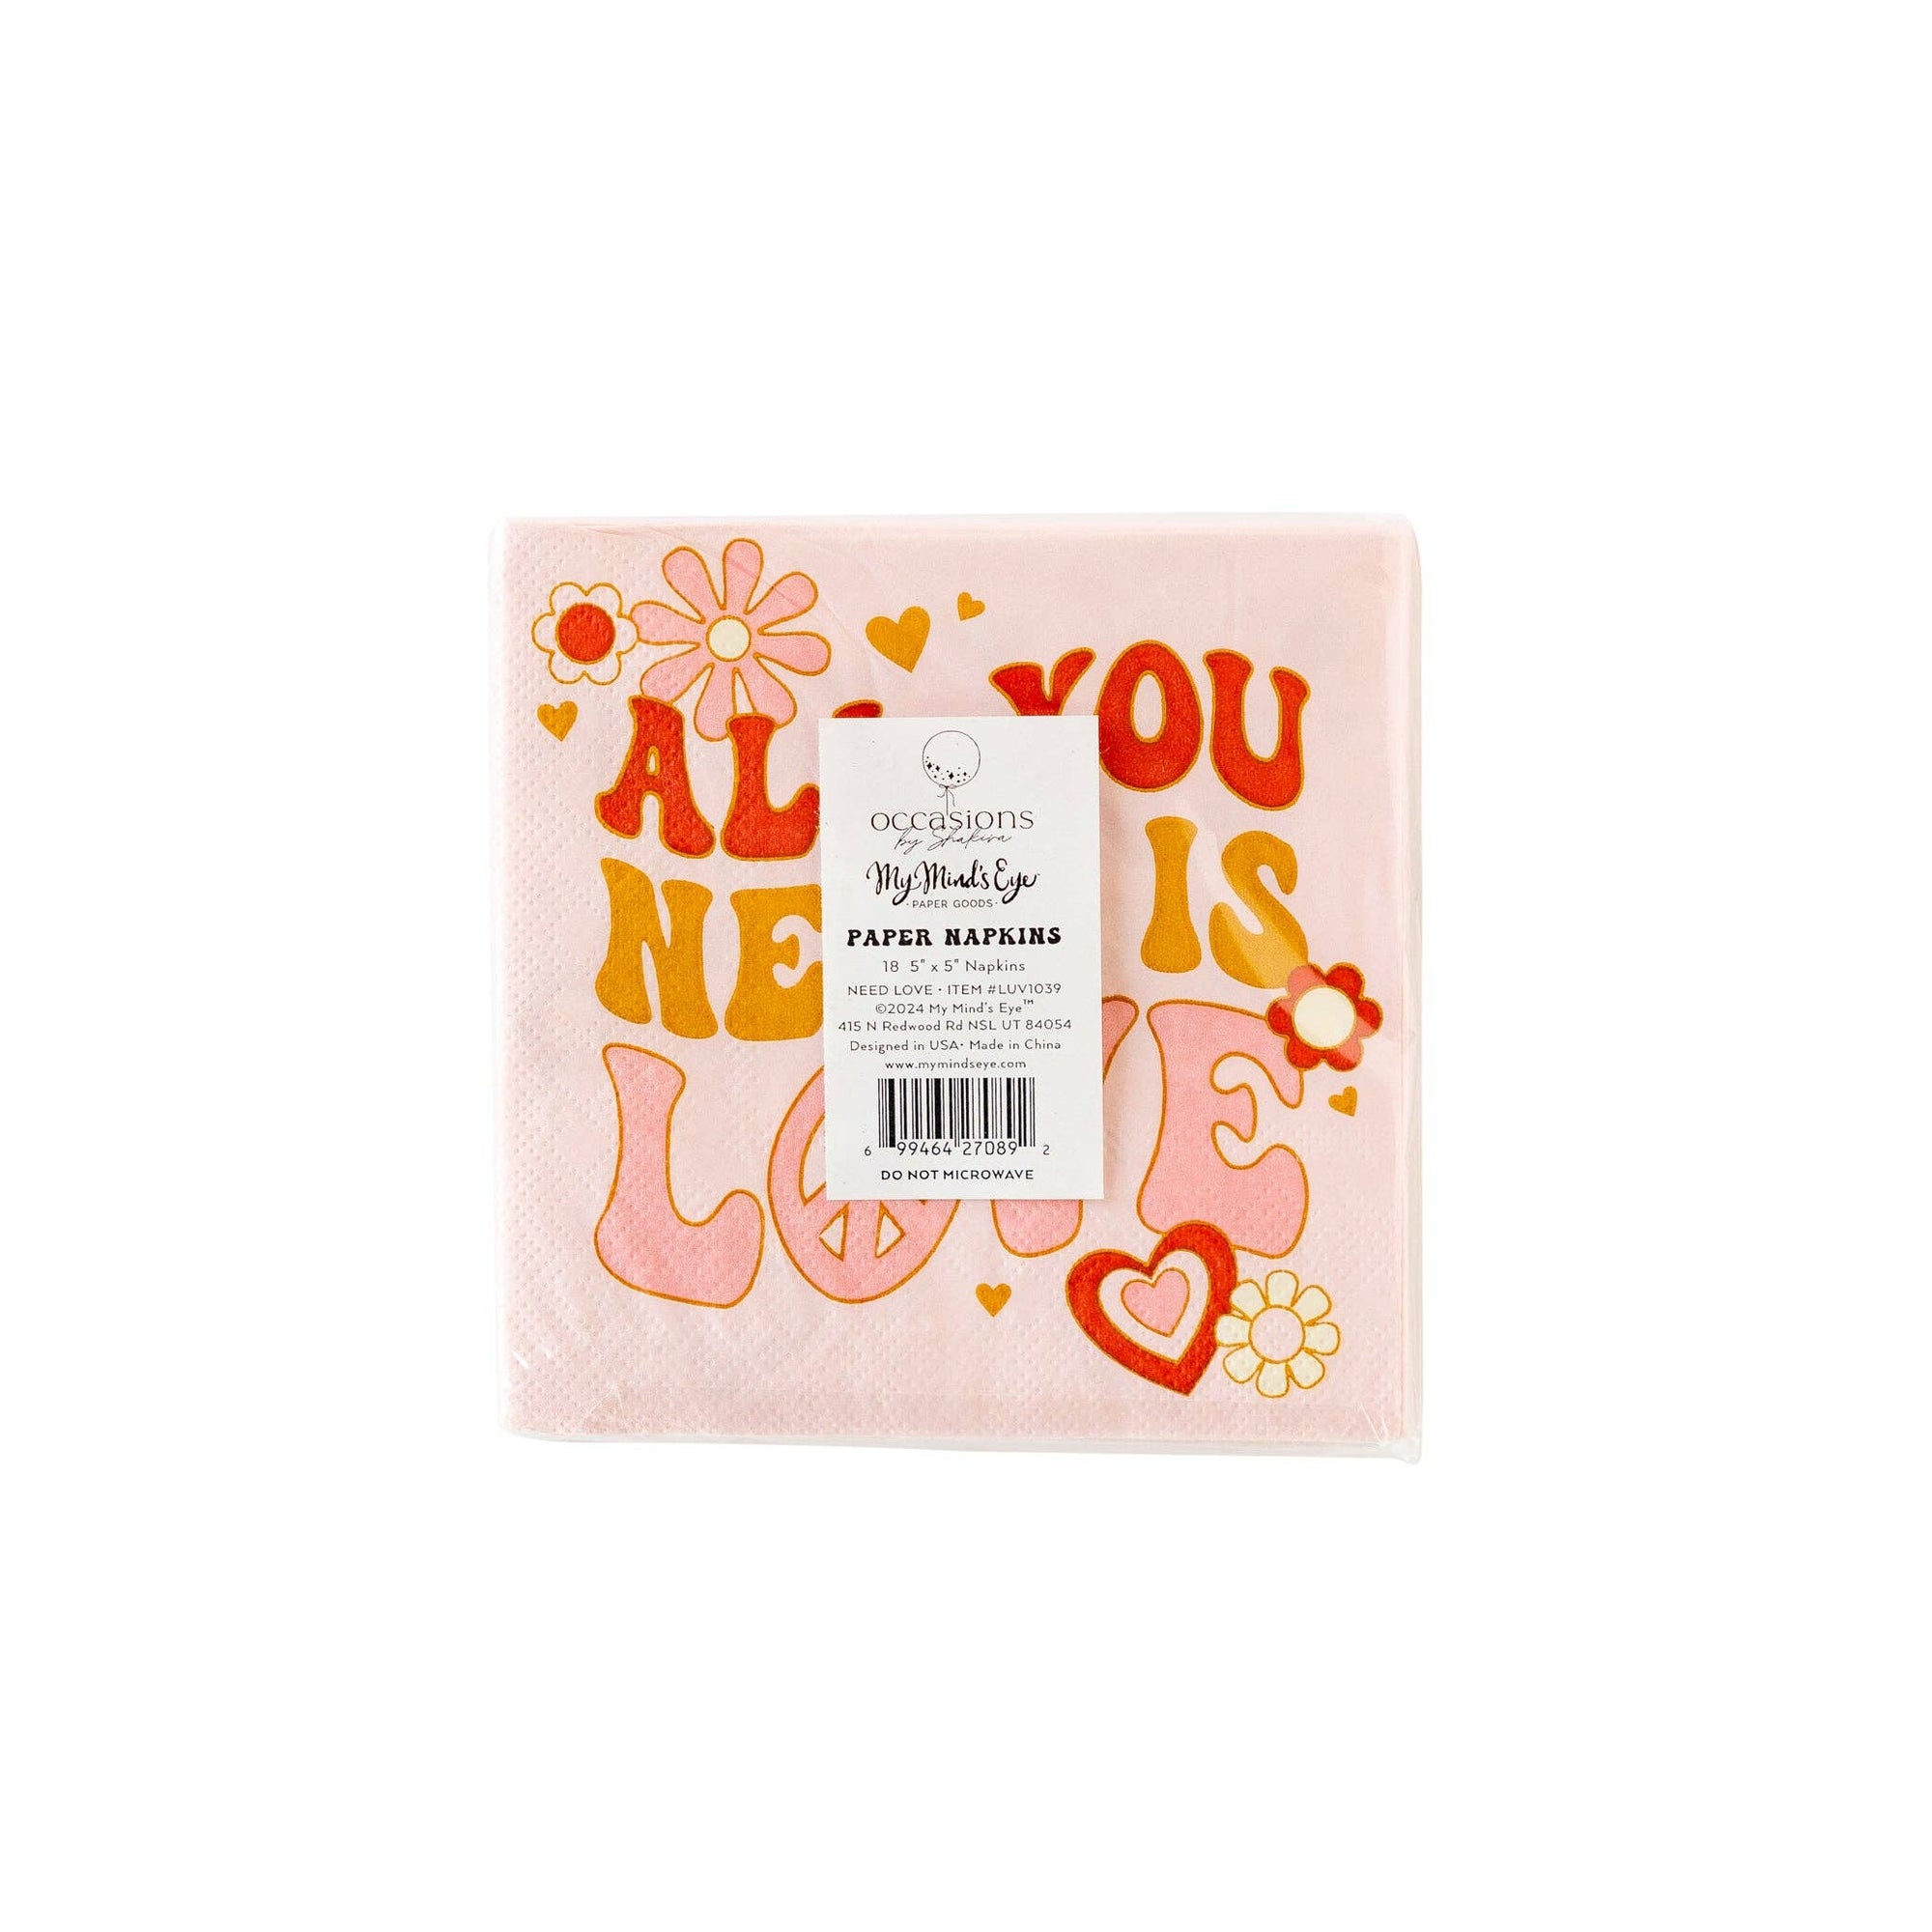 All you Need is Love Cocktail Napkins